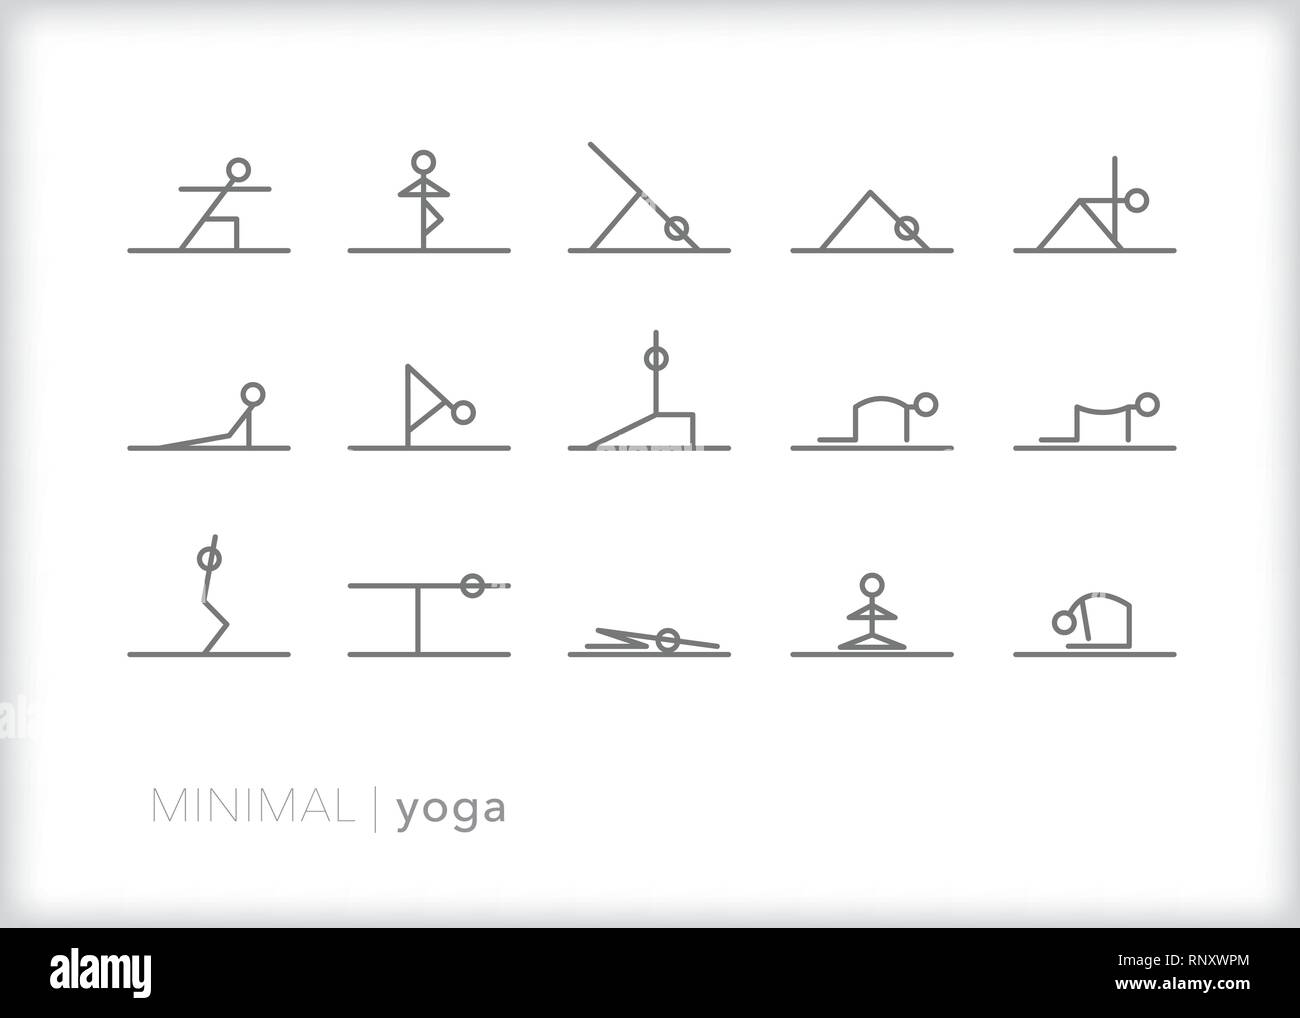 Yoga Pose free vector icons designed by dDara | Free icons, Vector icon  design, Vector free